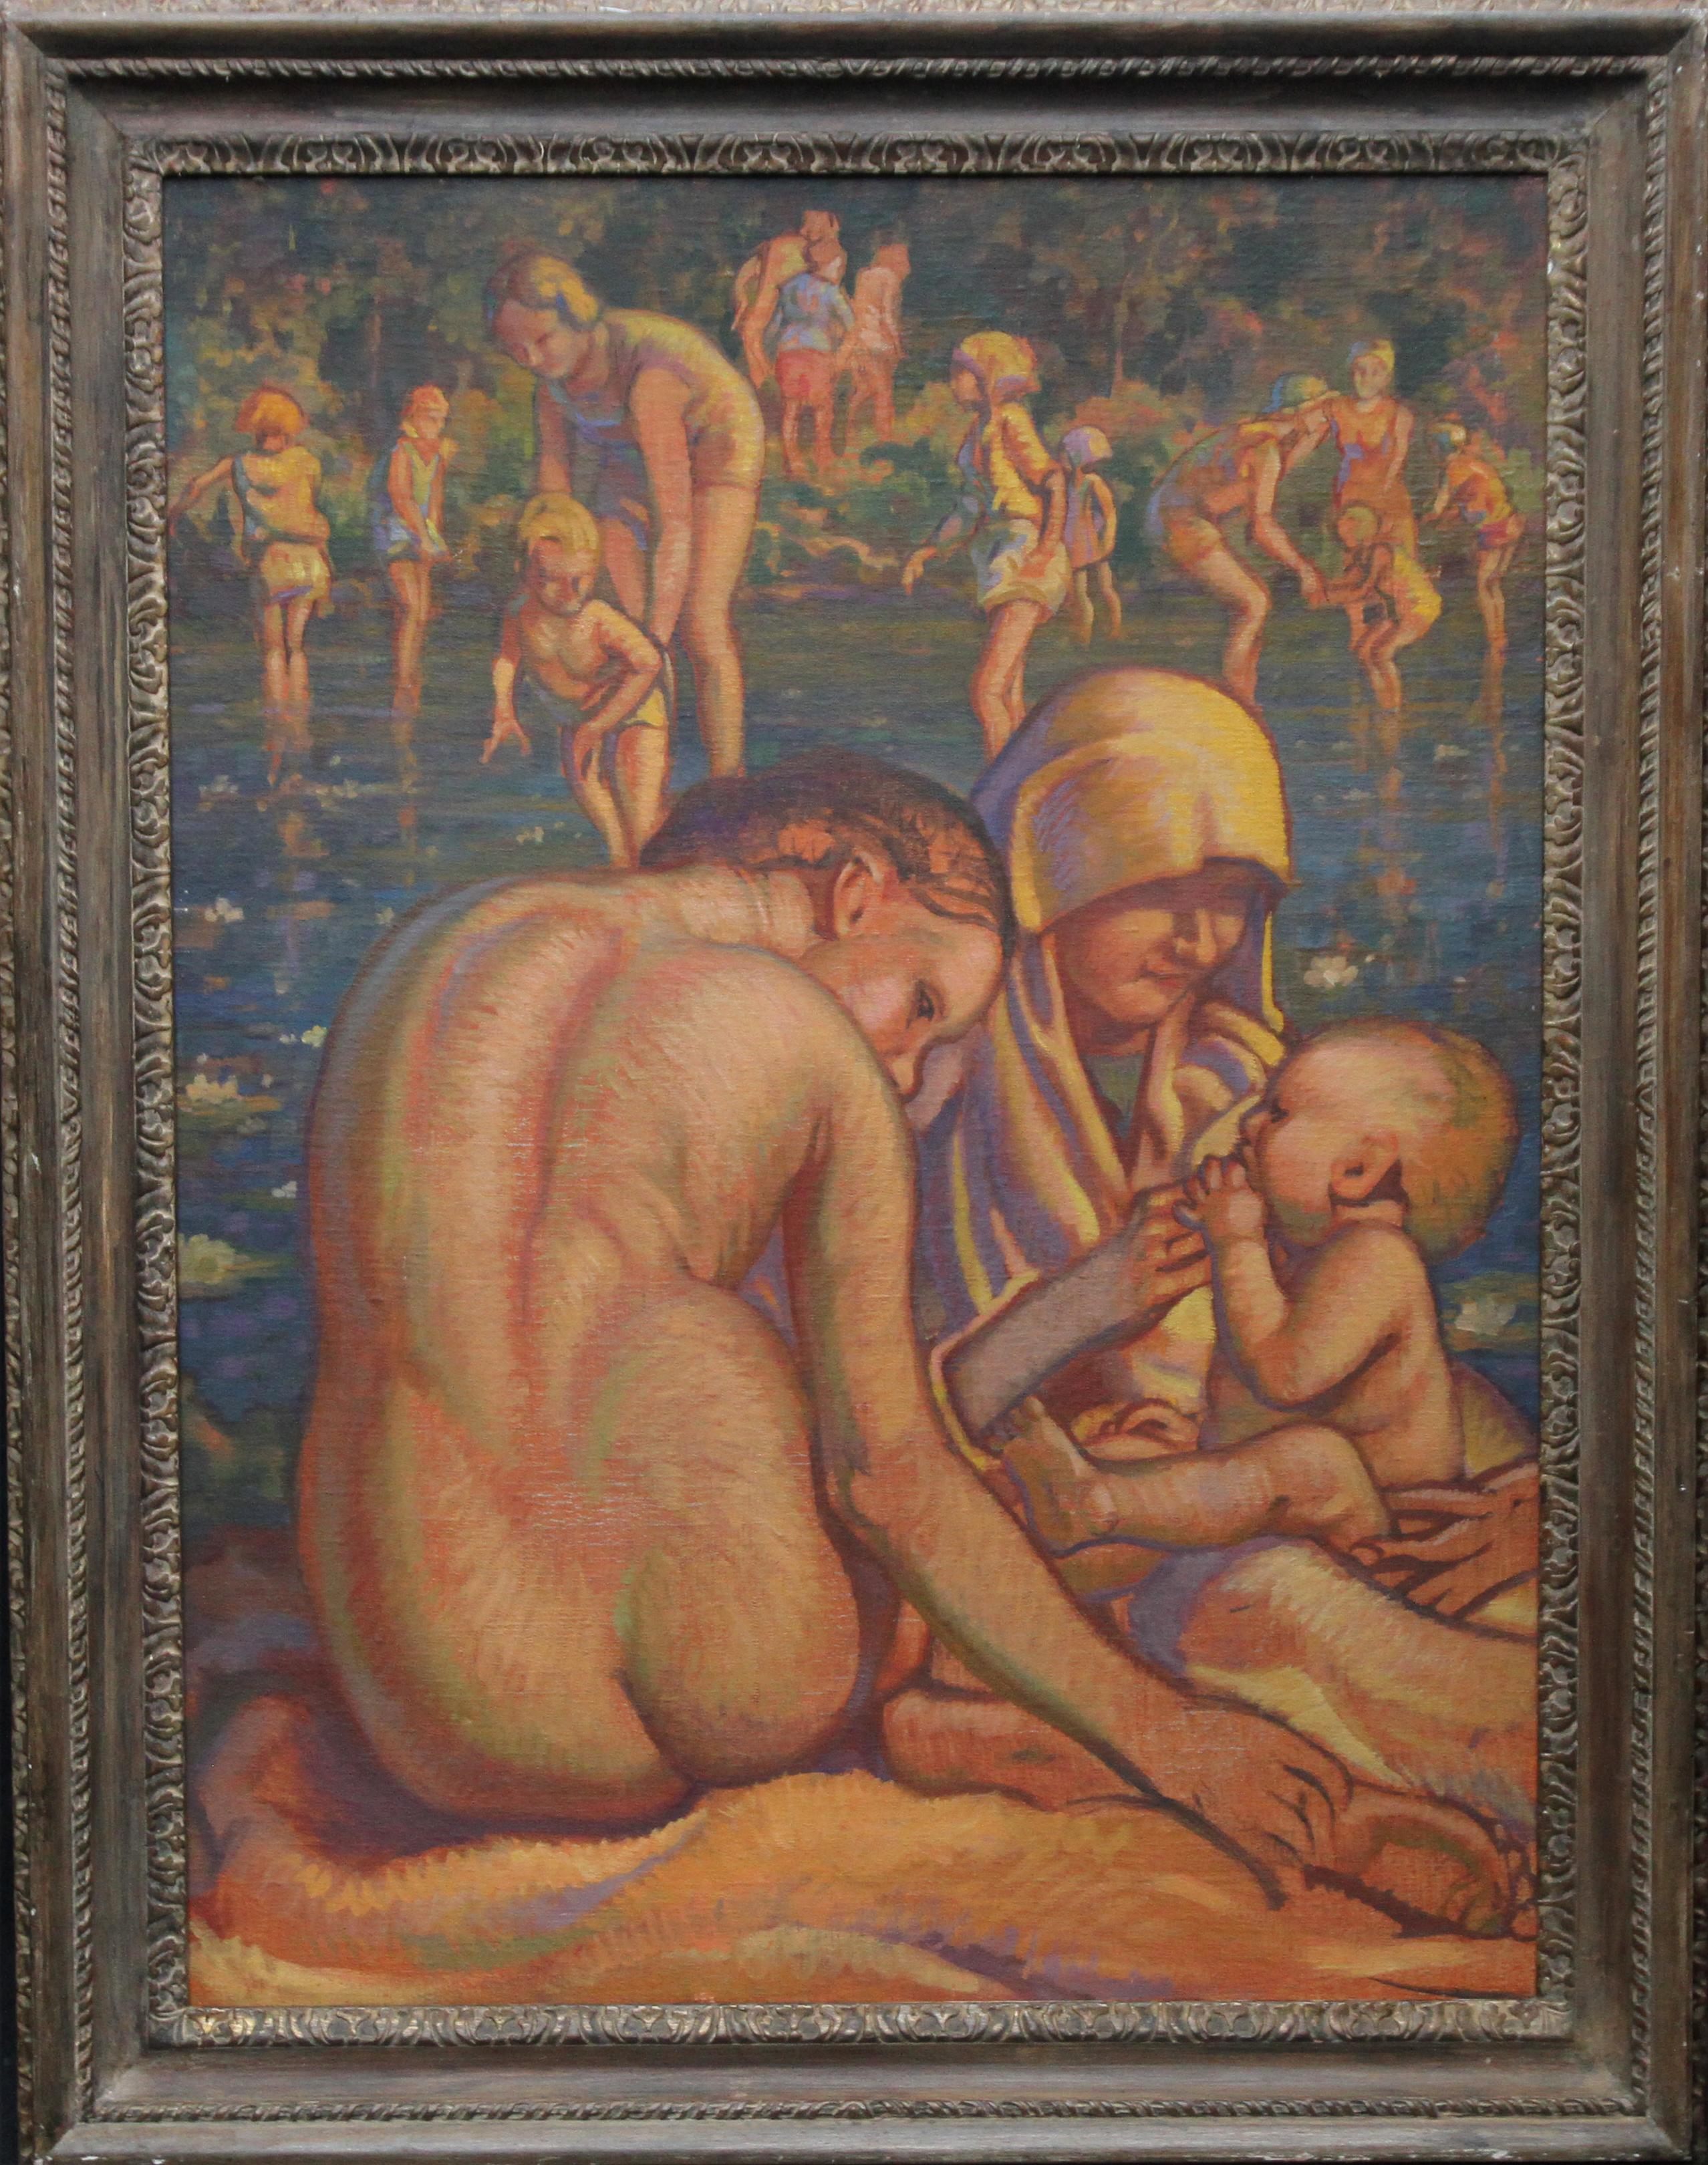 Unknown Nude Painting - Mother and Child Bathing - British Slade School 30's Art Deco nude oil painting